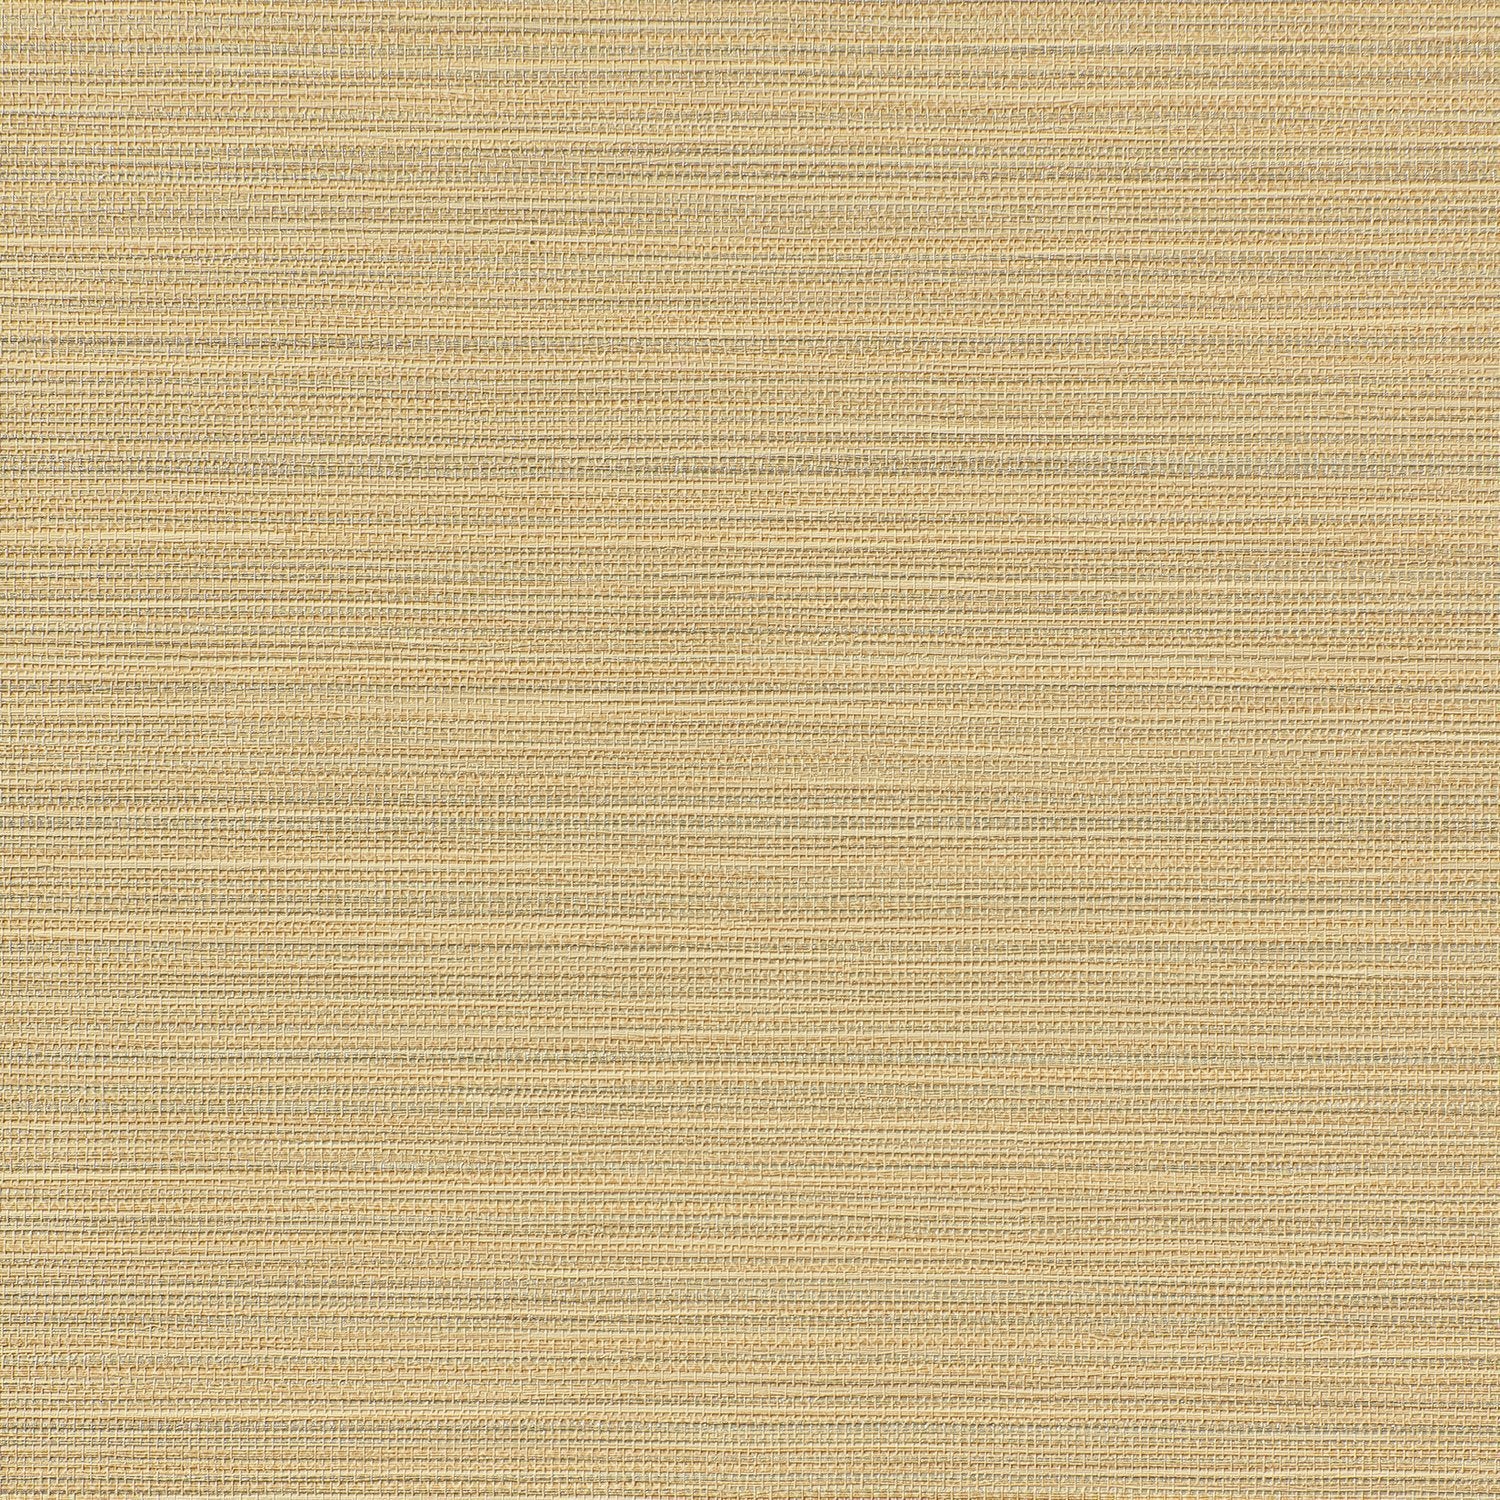 In Stitches - Y47812 - Wallcovering - Vycon - Kube Contract